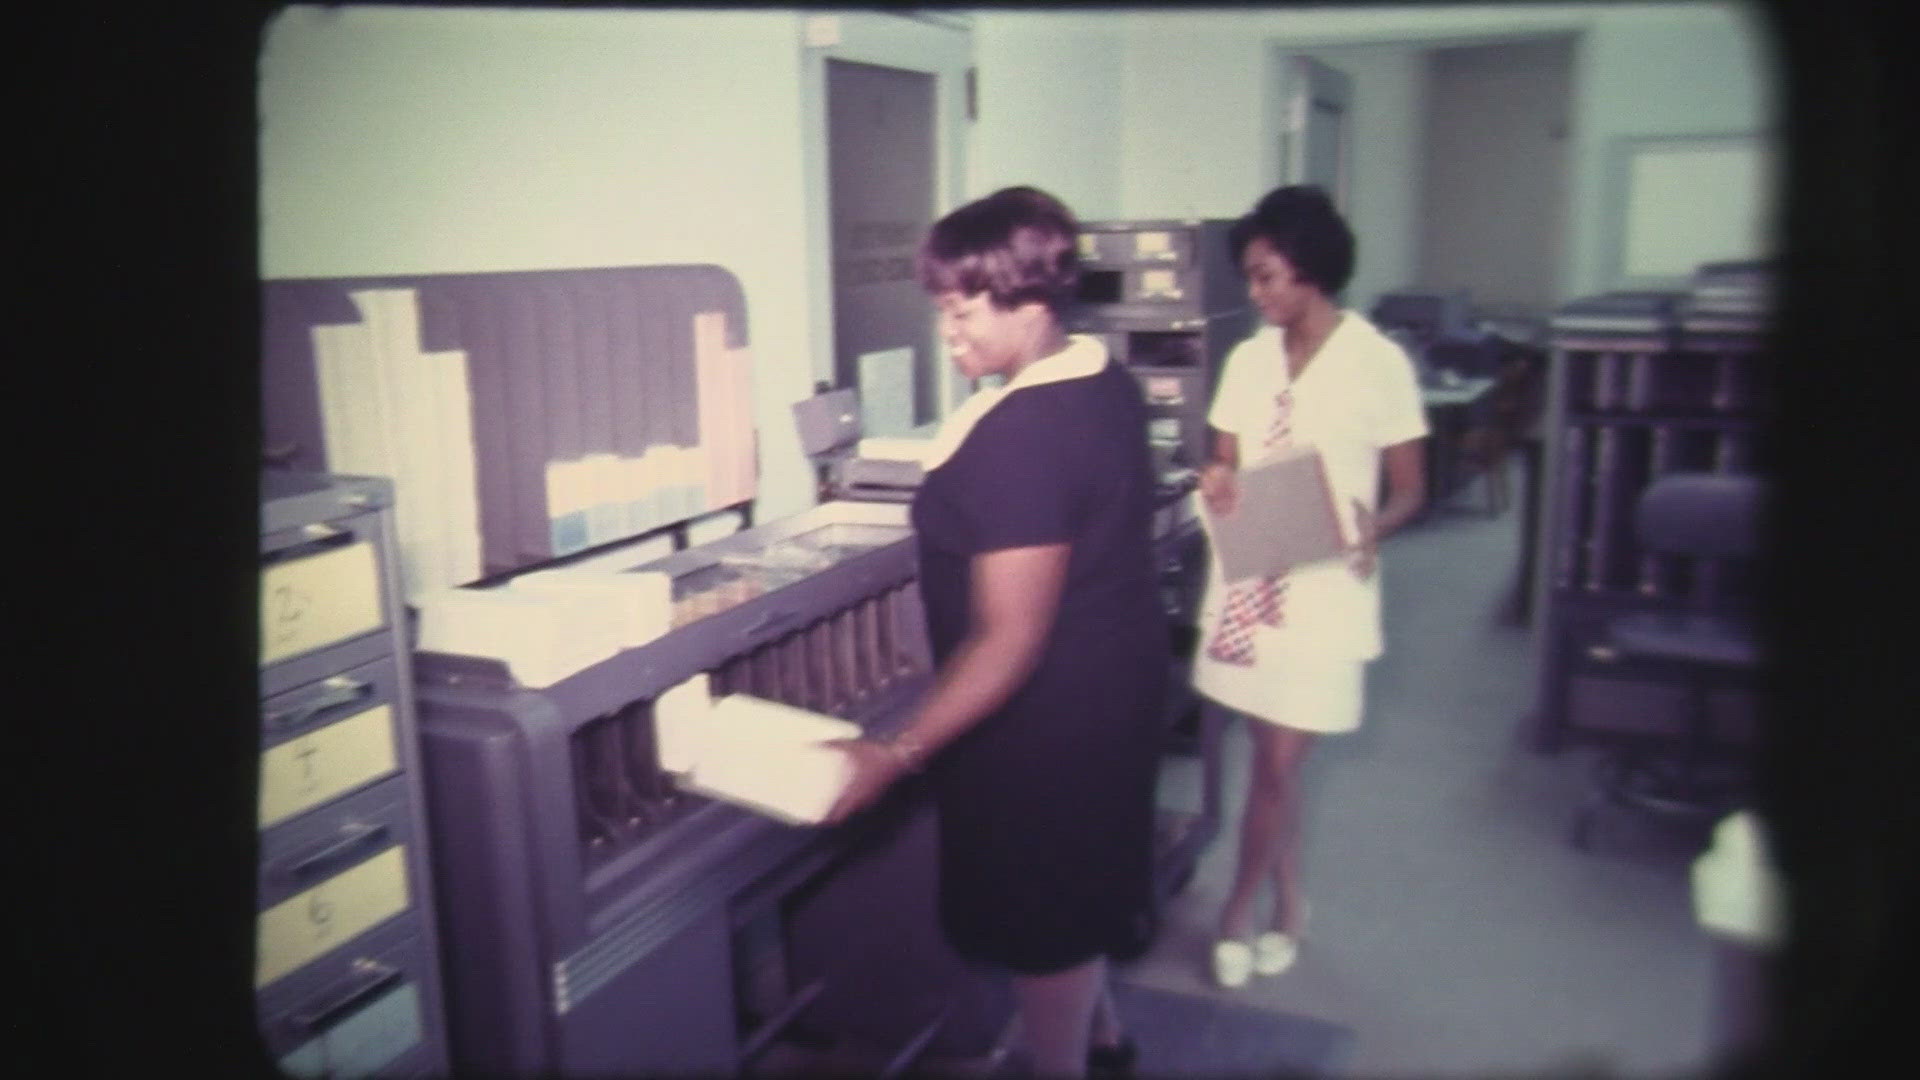 May 19, 1970 we got a look at what Computer Science looked like at NC A&T.